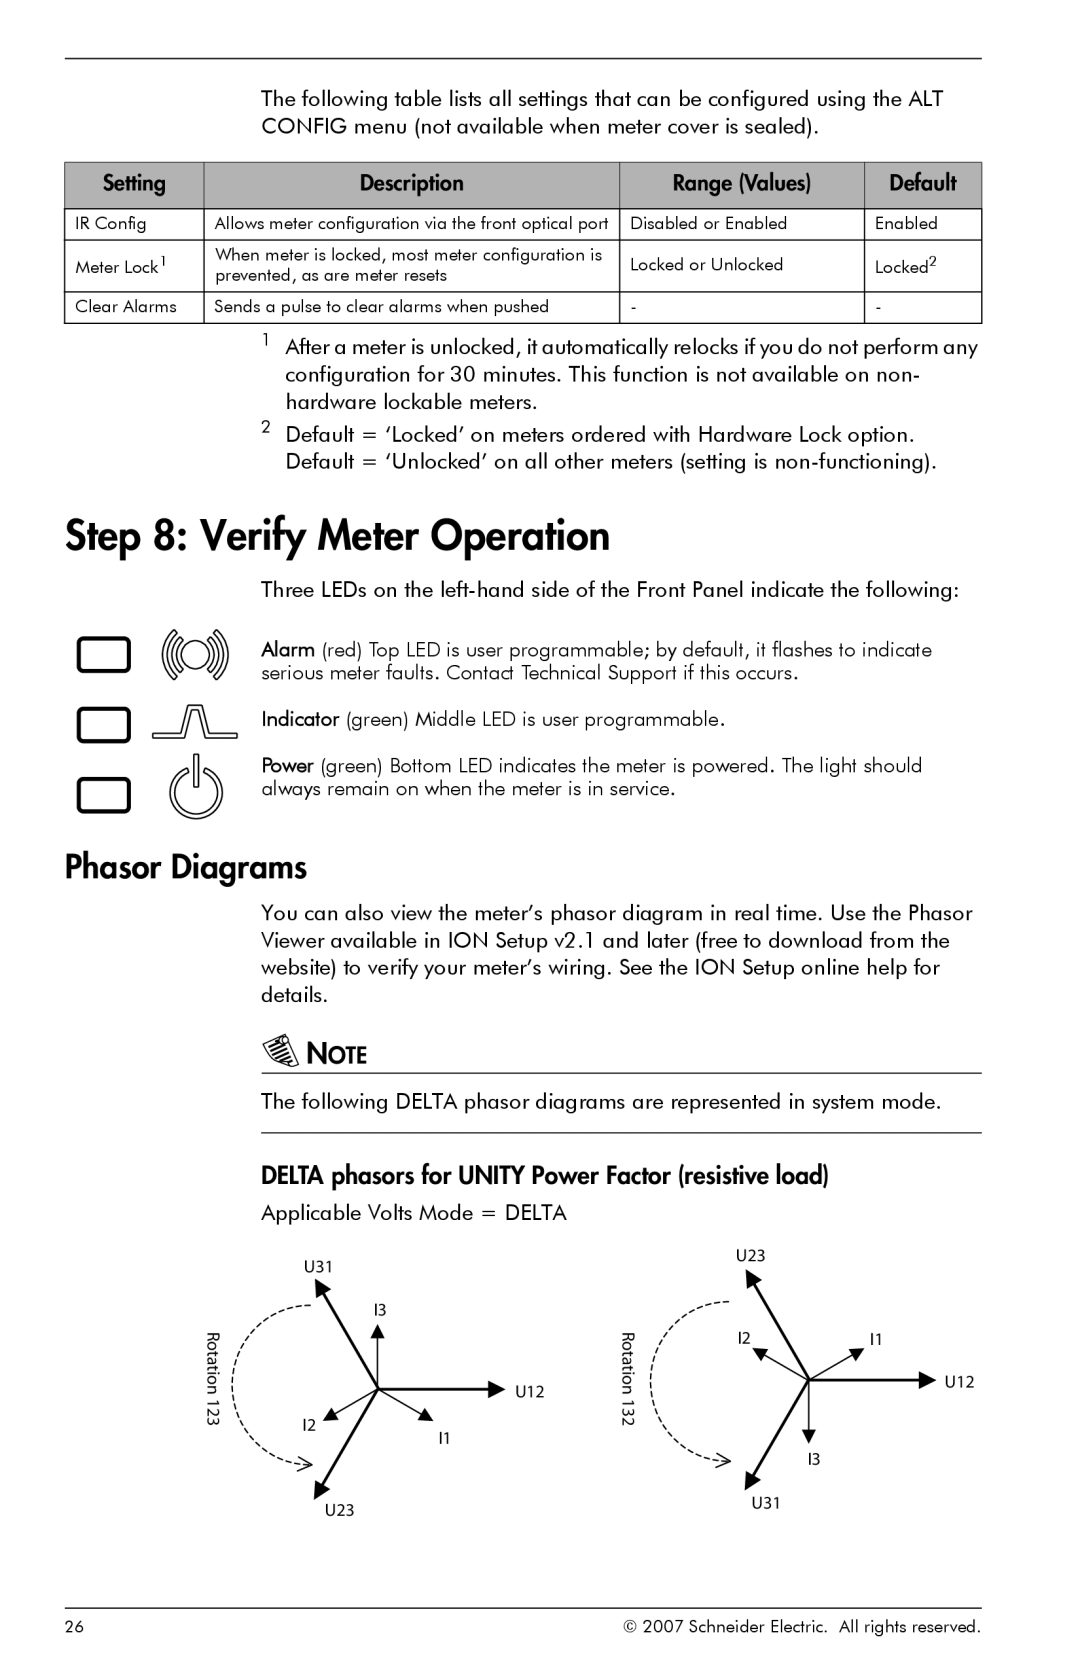 Schneider Electric ION8800 Verify Meter Operation, Phasor Diagrams, DELTA phasors for UNITY Power Factor resistive load 